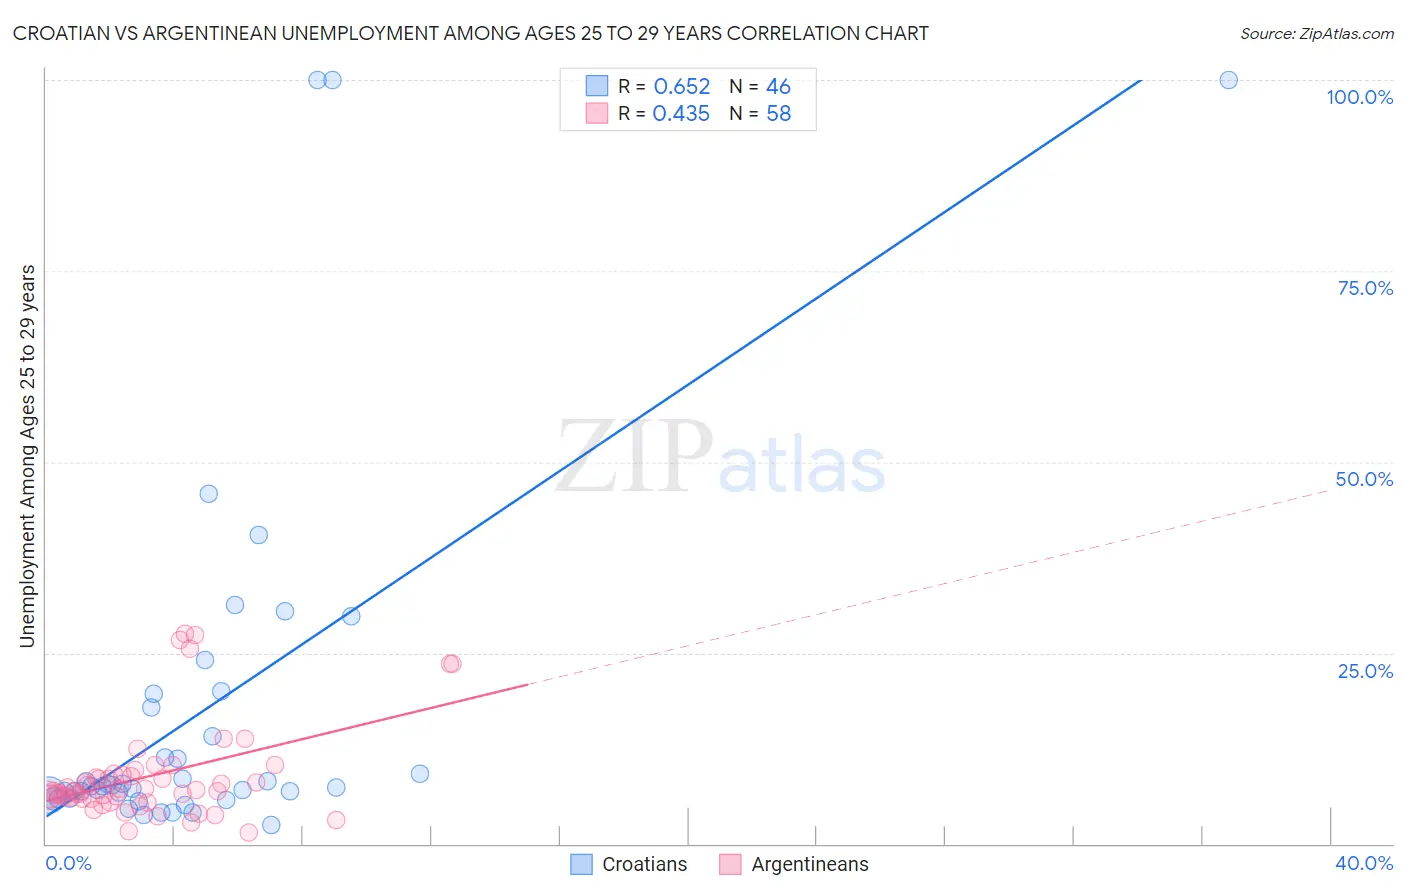 Croatian vs Argentinean Unemployment Among Ages 25 to 29 years